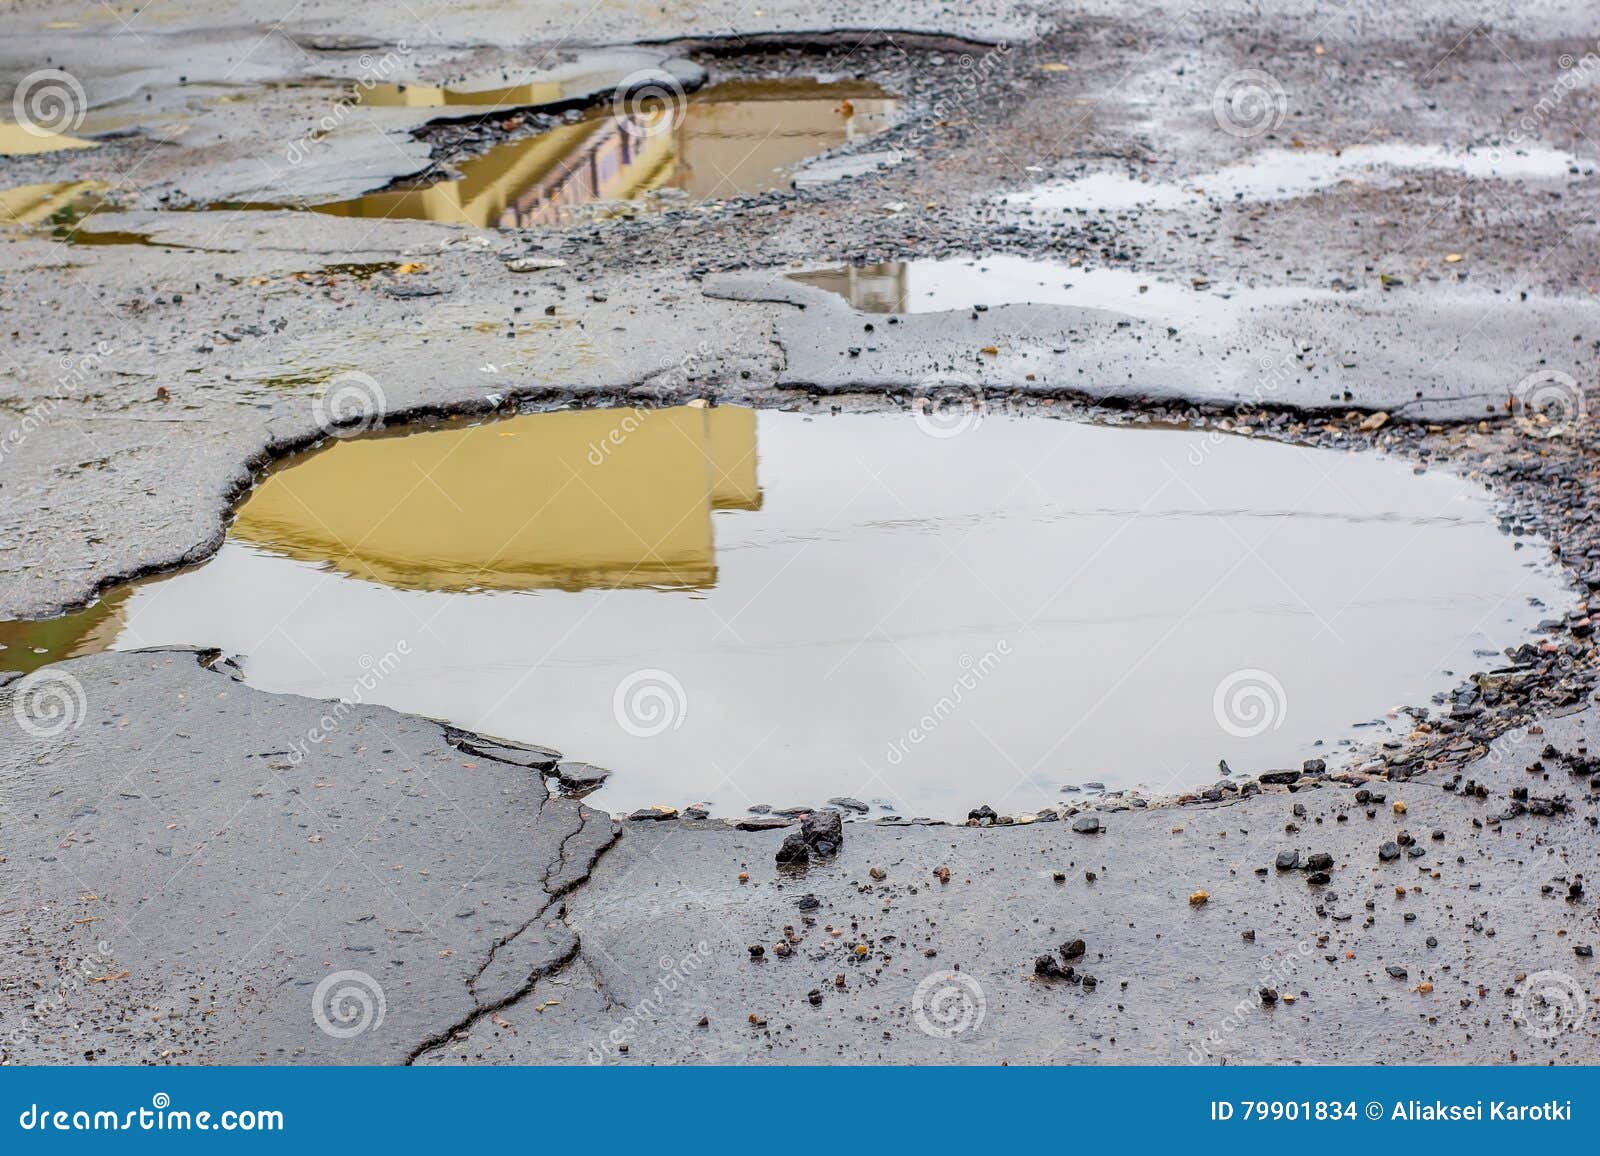 water damaged by potholes in the road